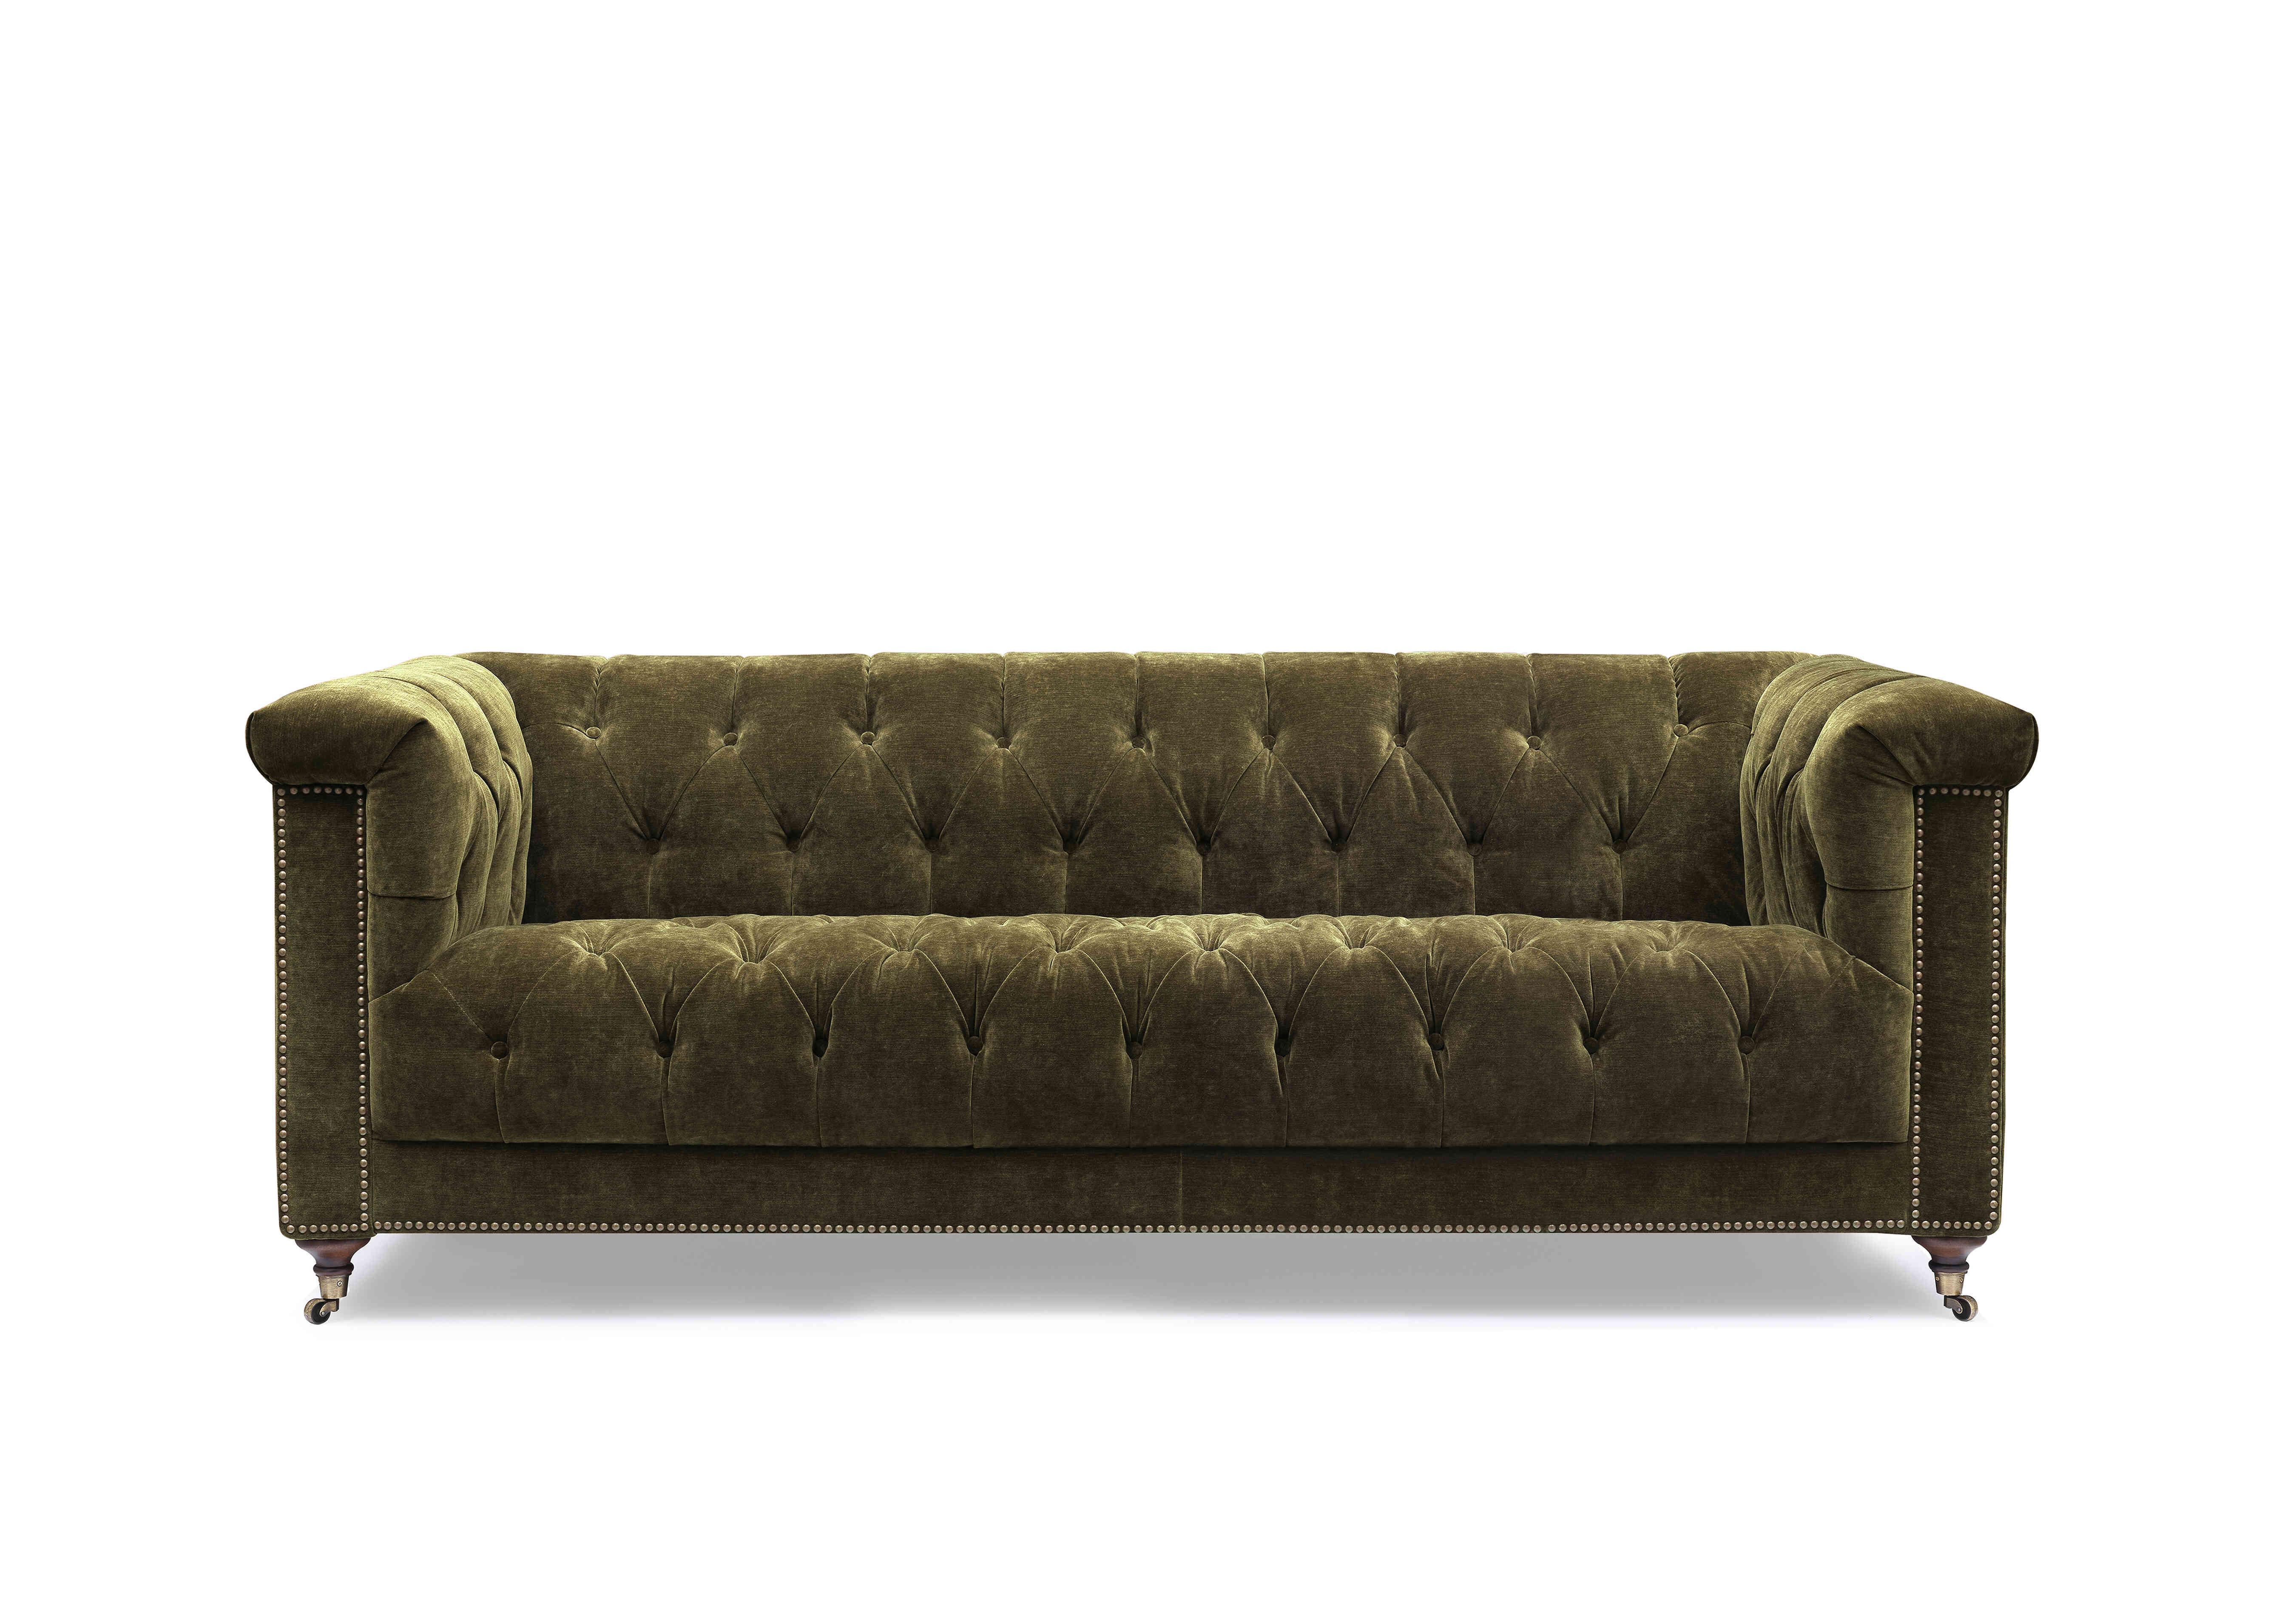 Wallace 3 Seater Fabric Chesterfield Sofa in X3y1-W018 Pine on Furniture Village